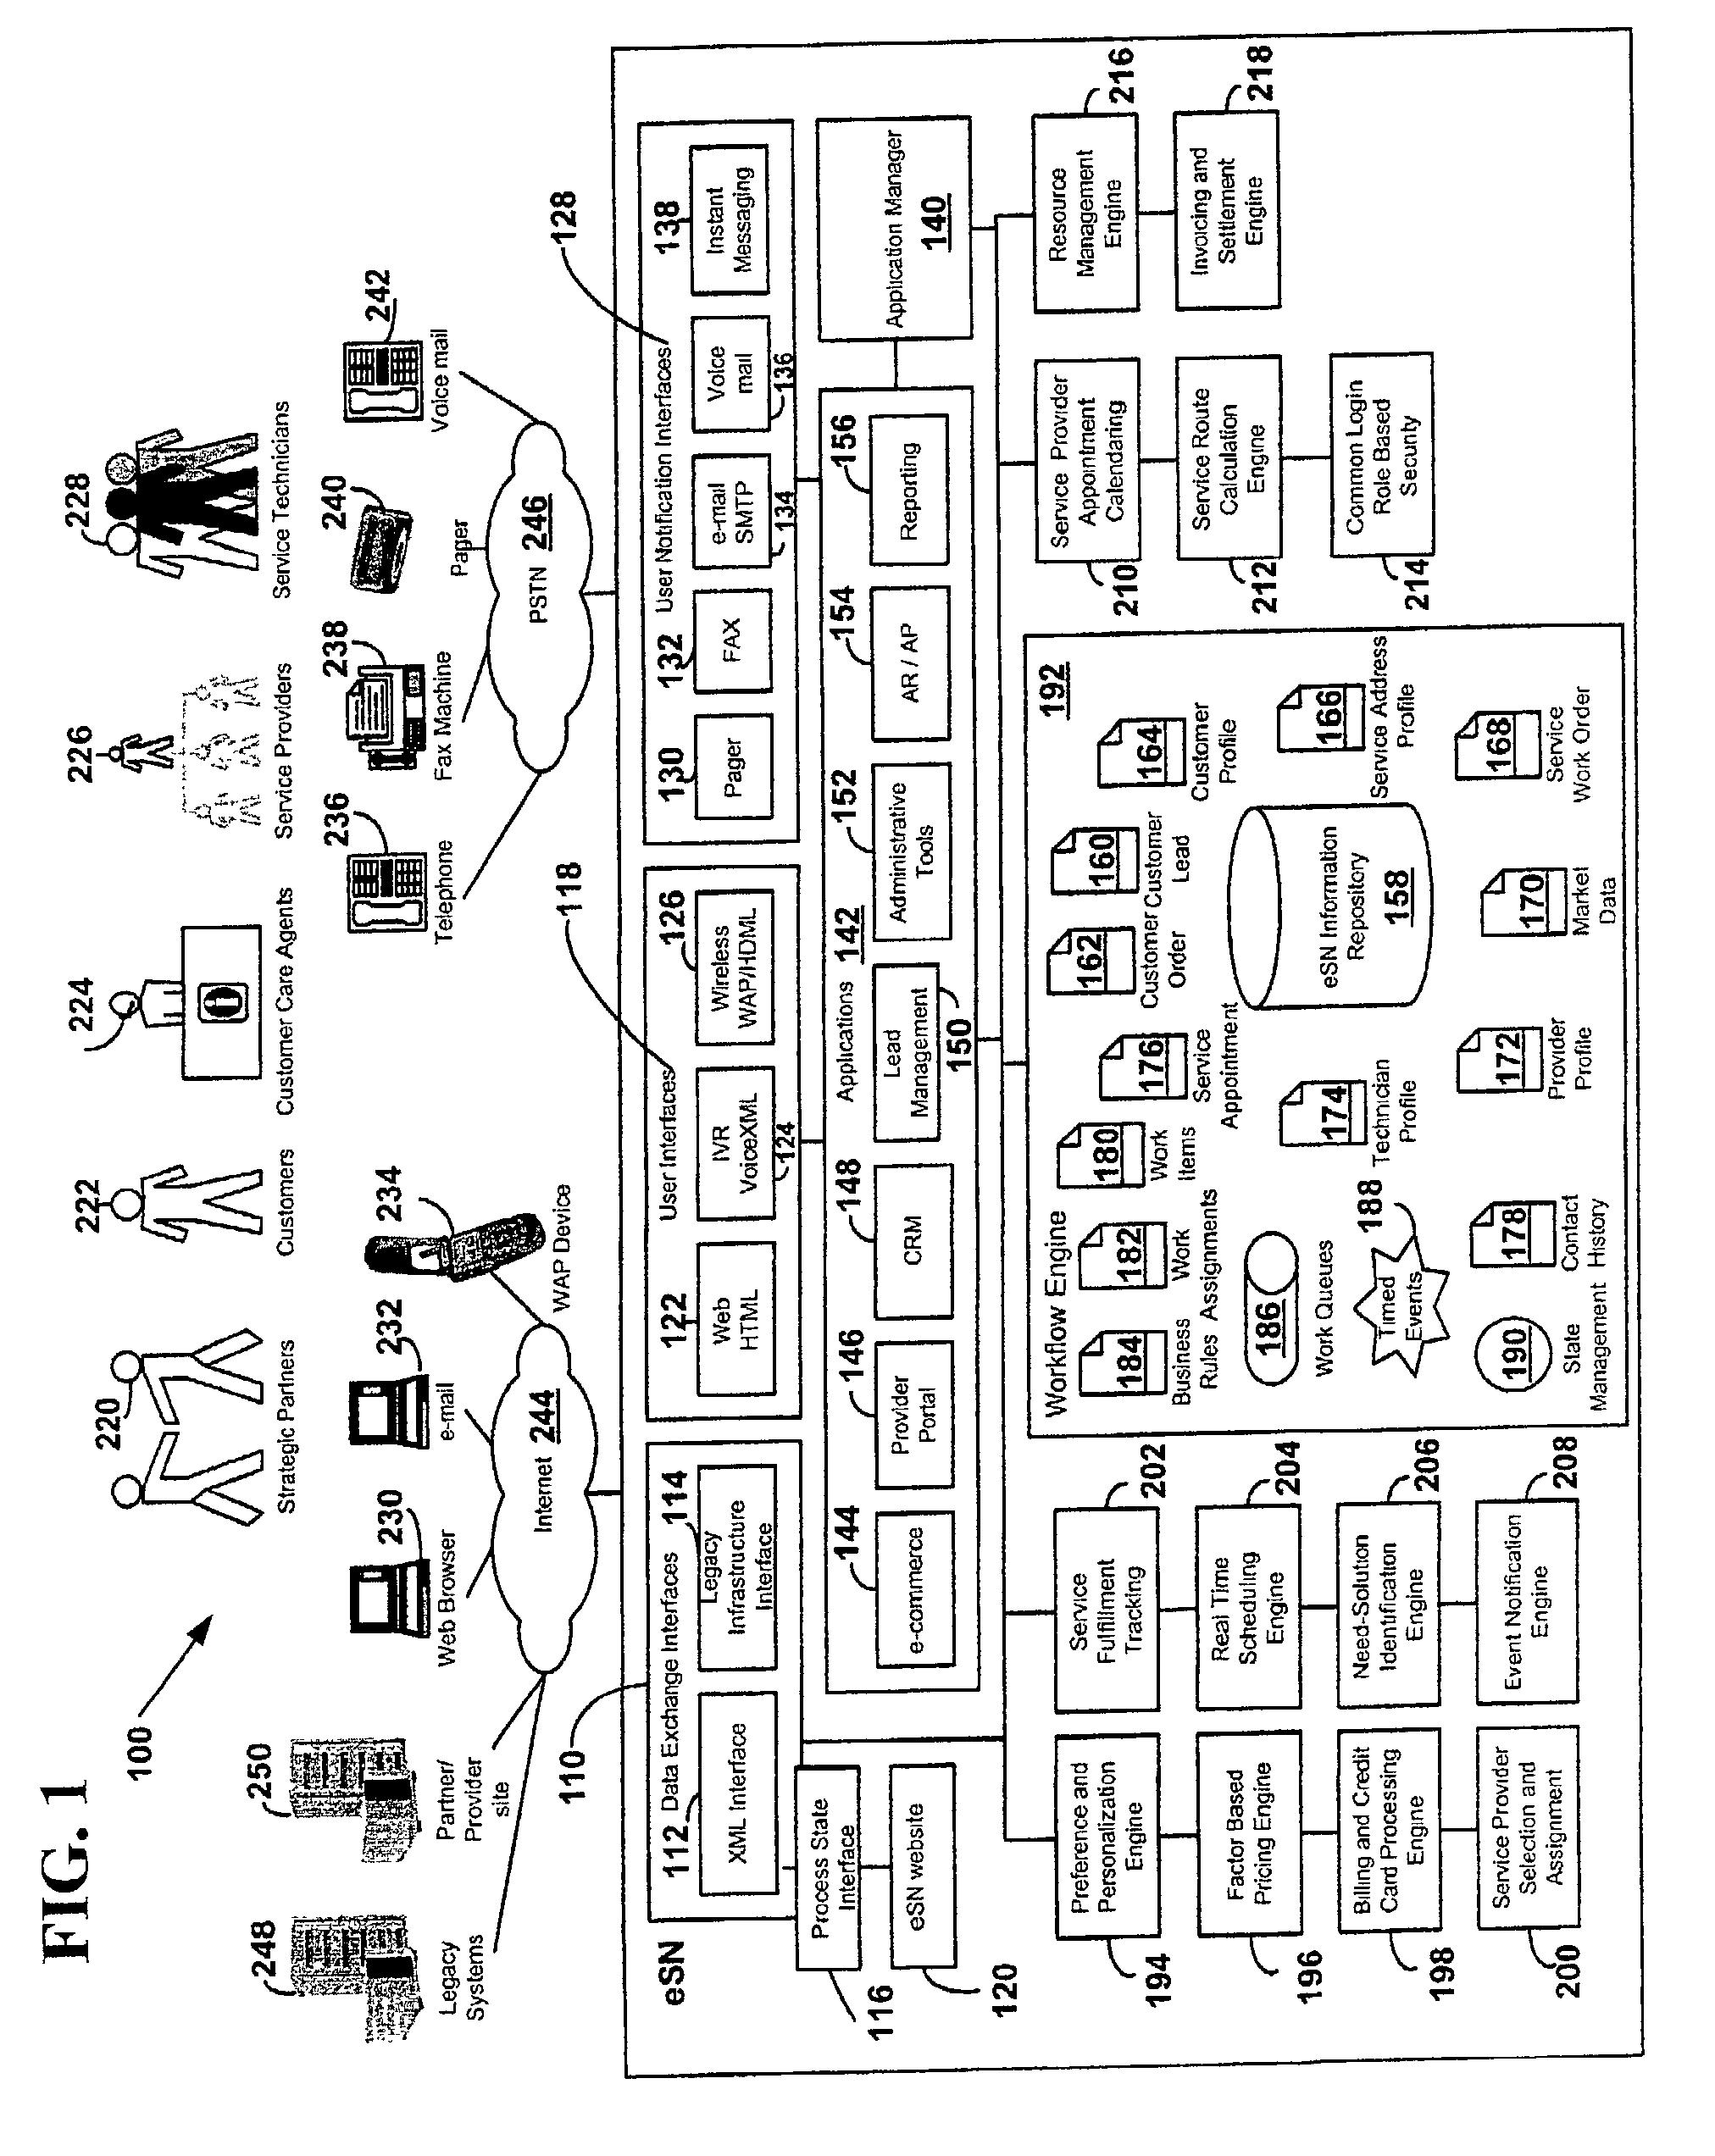 Method and system to select, schedule and purchase home services